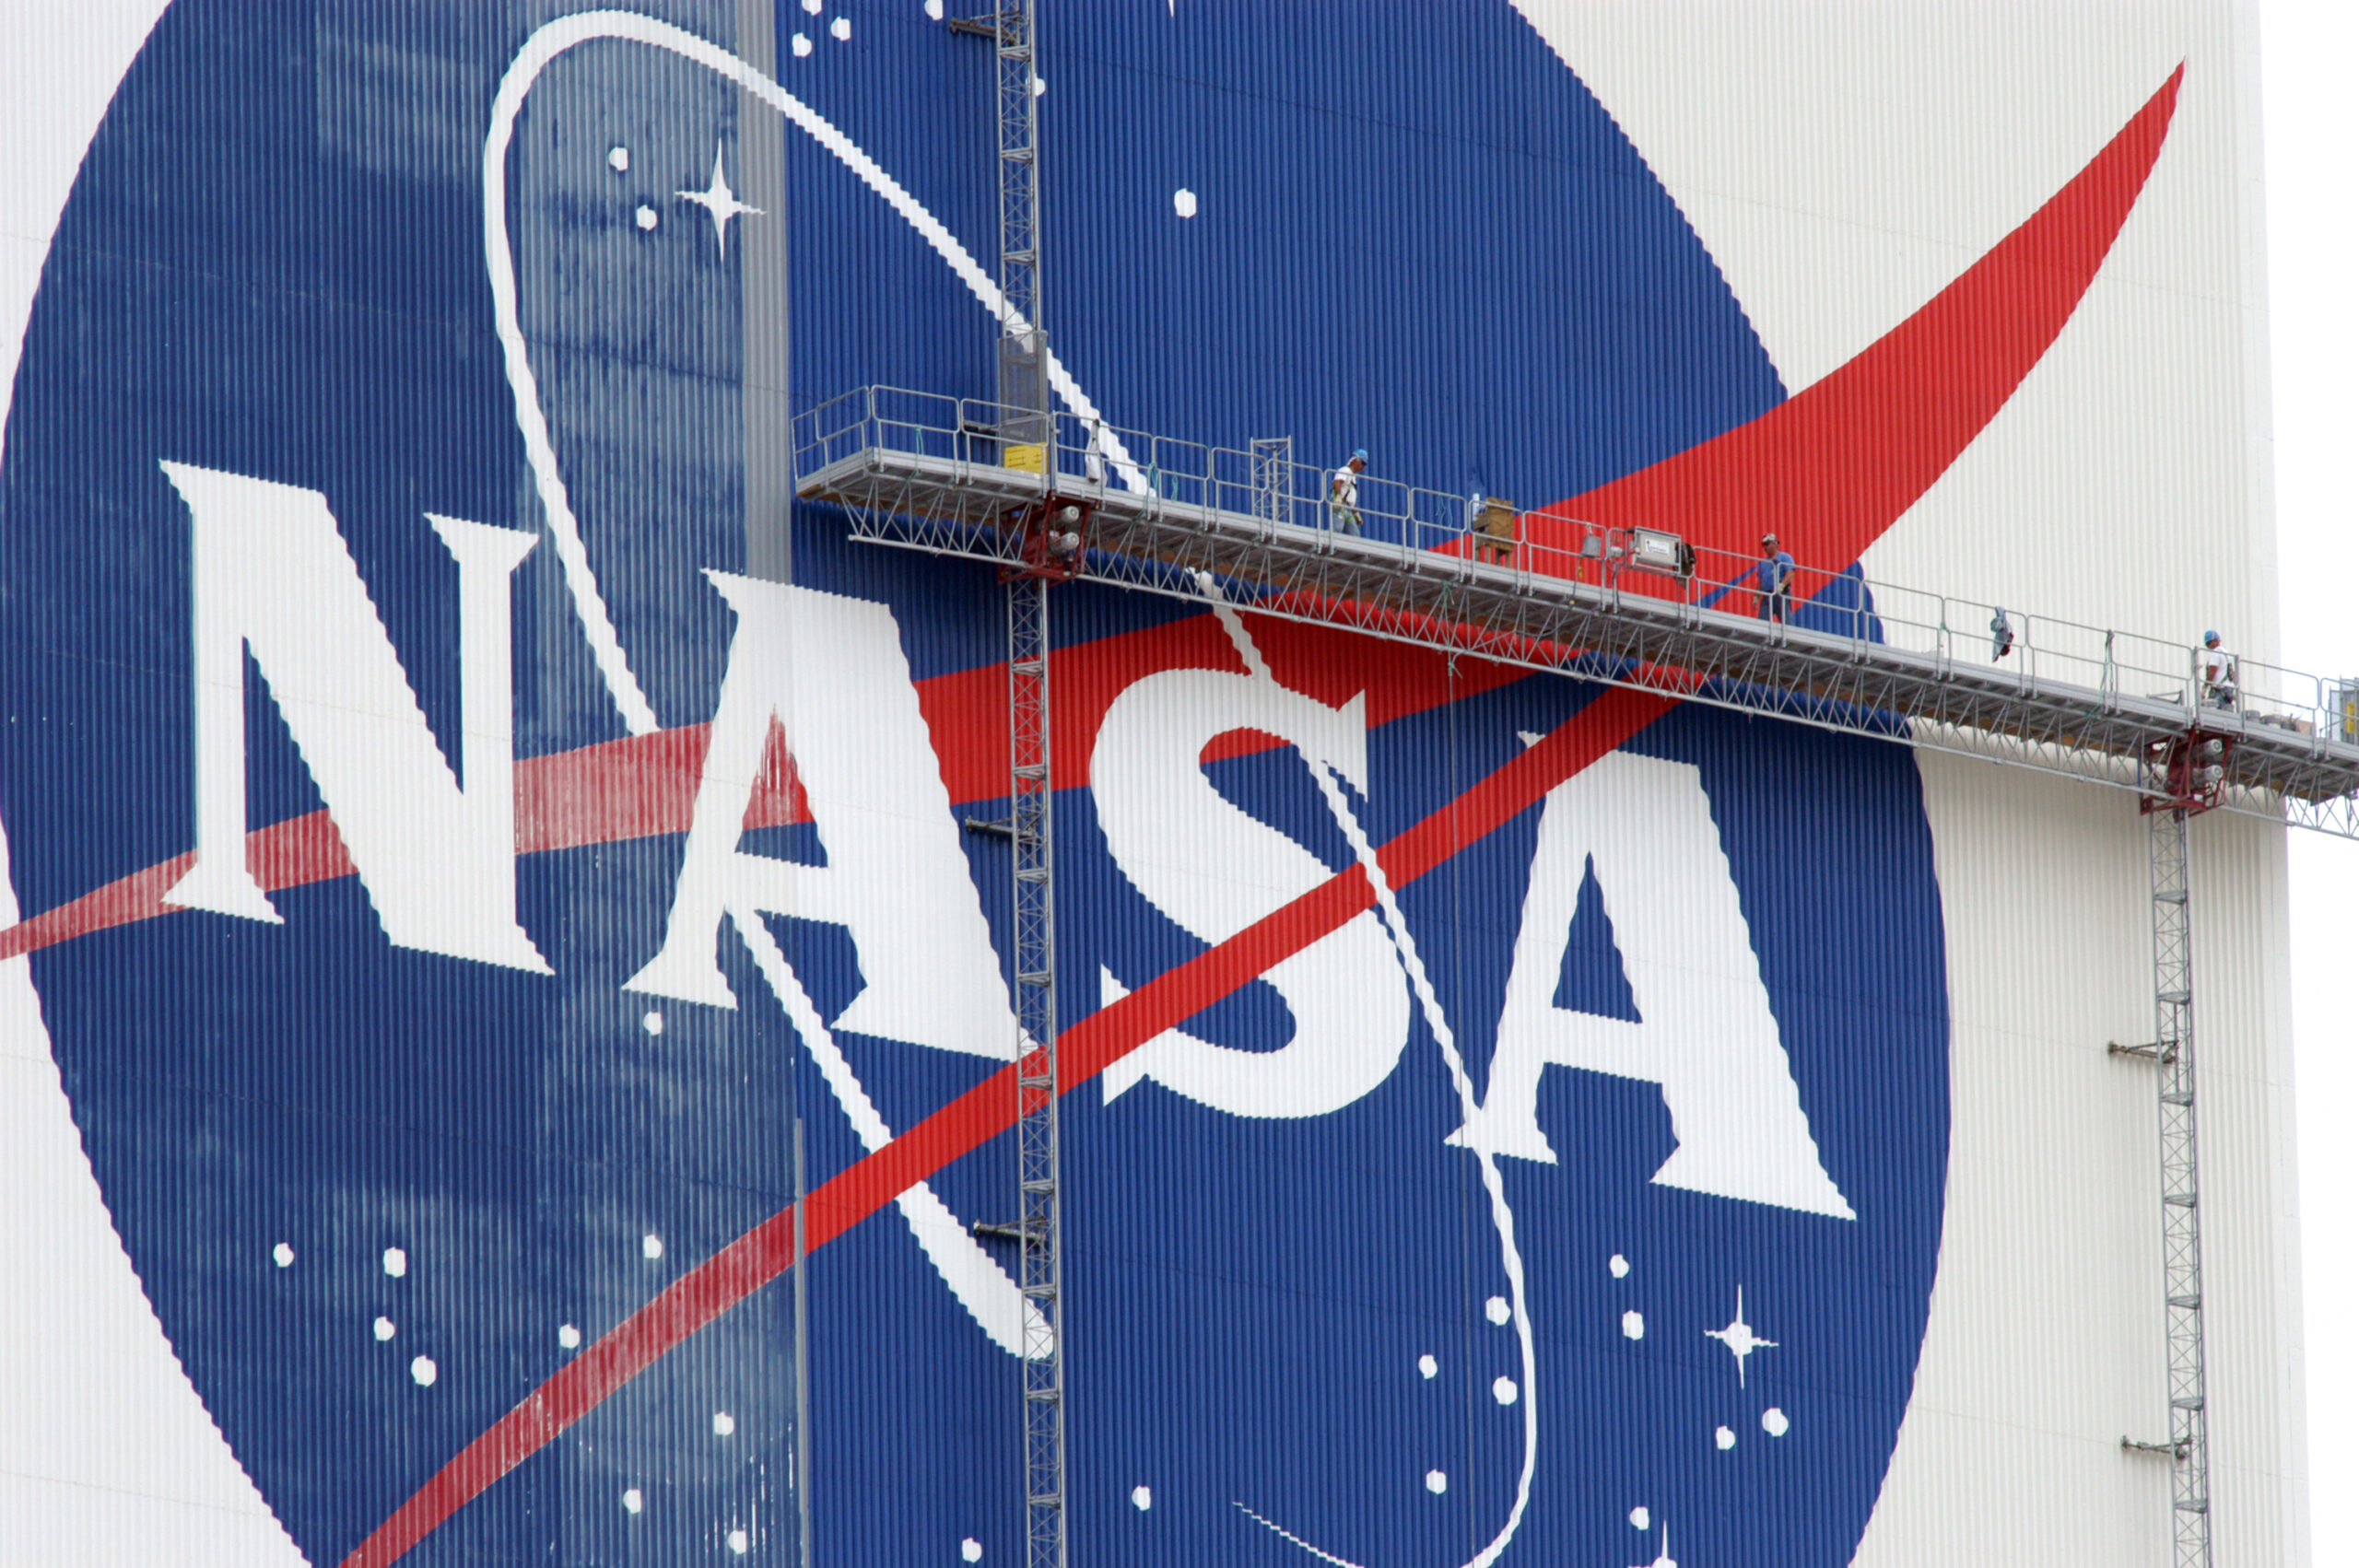 Join NASA for Live Coverage of Orion’s Return to Earth